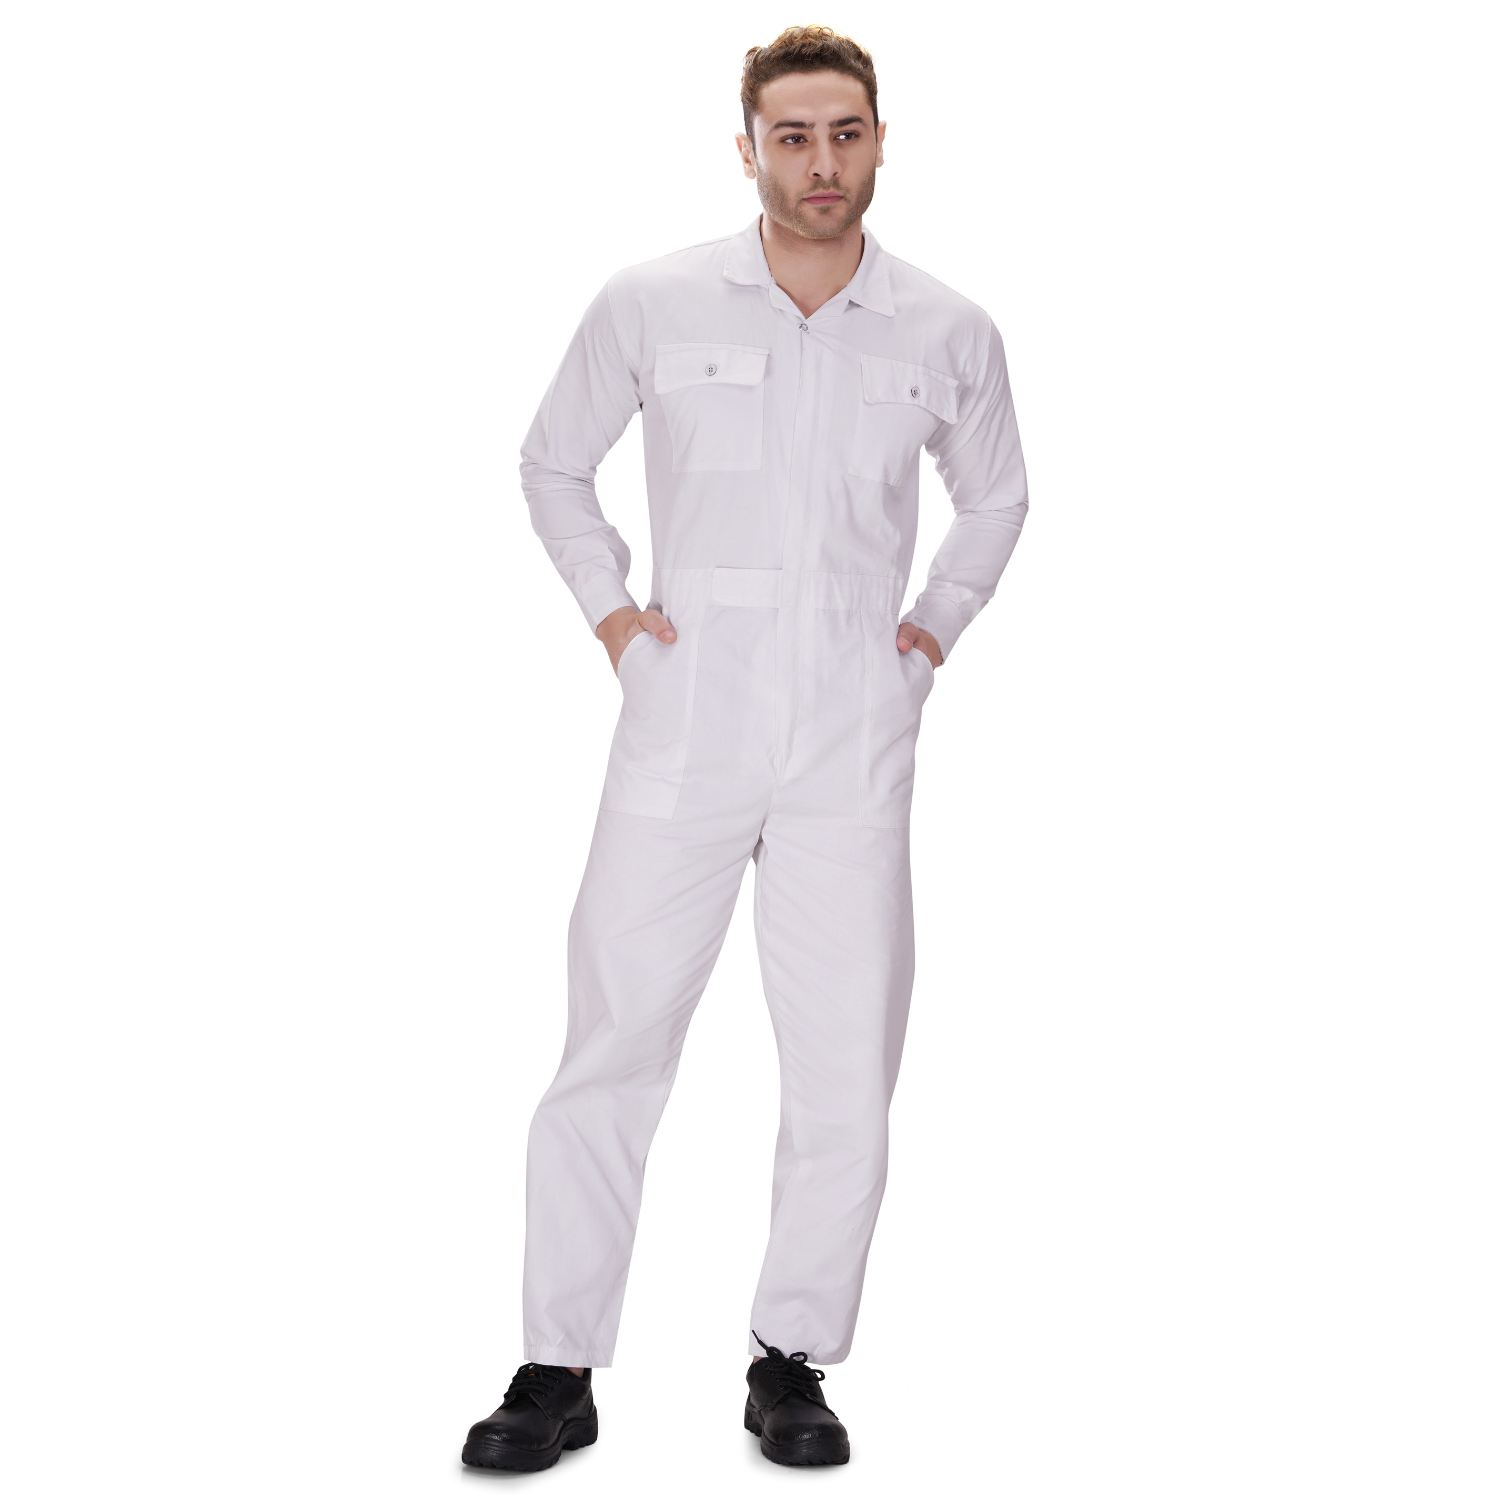 Boilersuit (COVERALL) Cotton Button Type White - China Boilersuit price